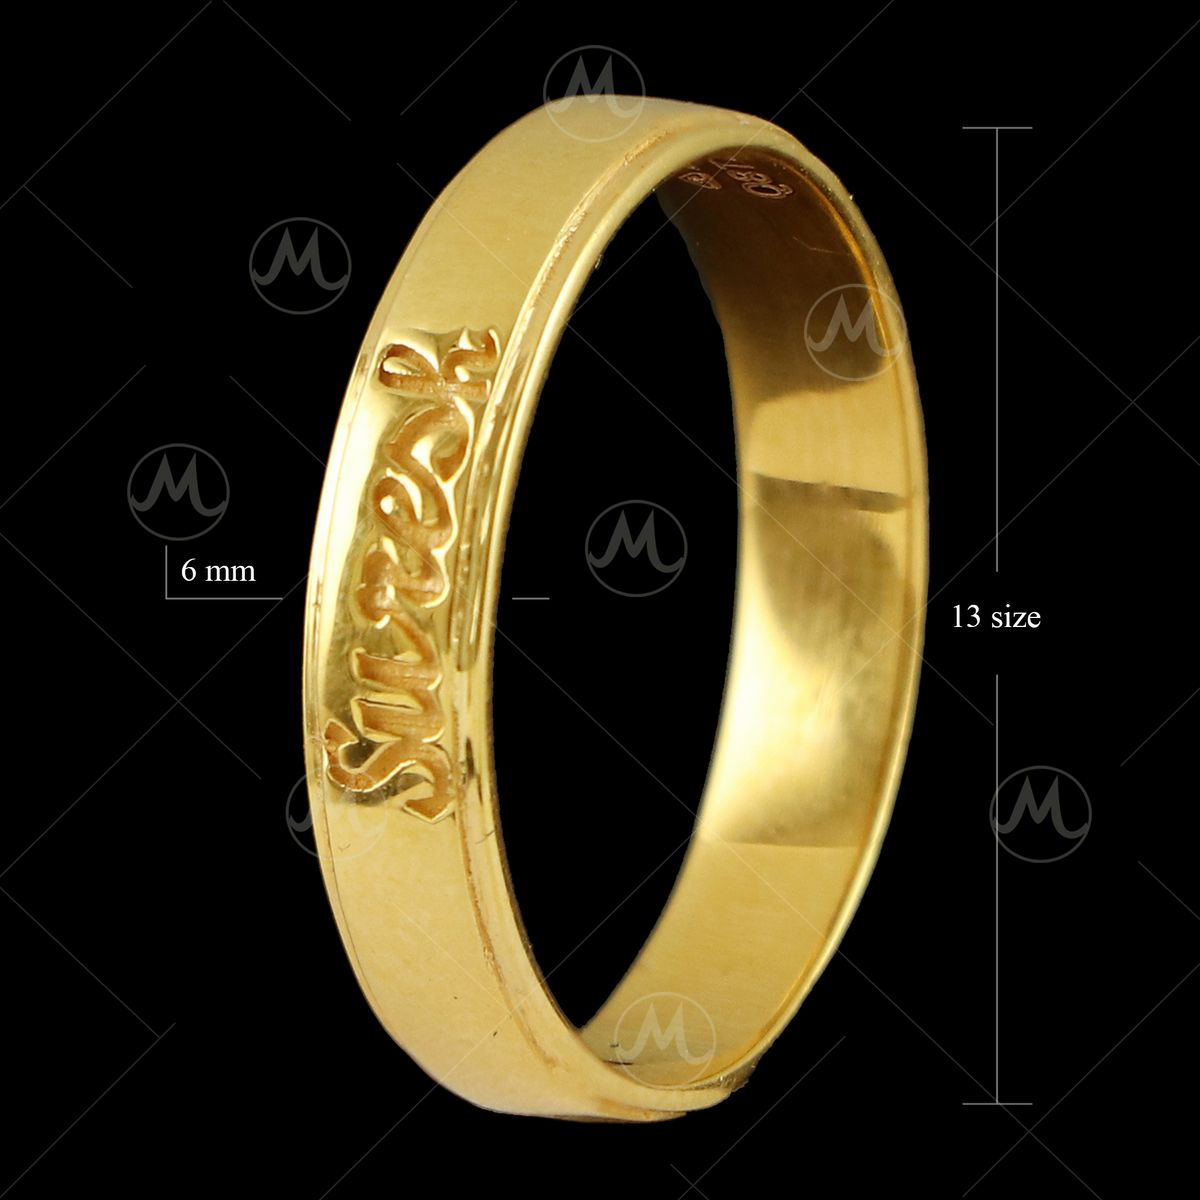 Custom Single Name Ring in Solid Gold and Diamonds - Abhika Jewels